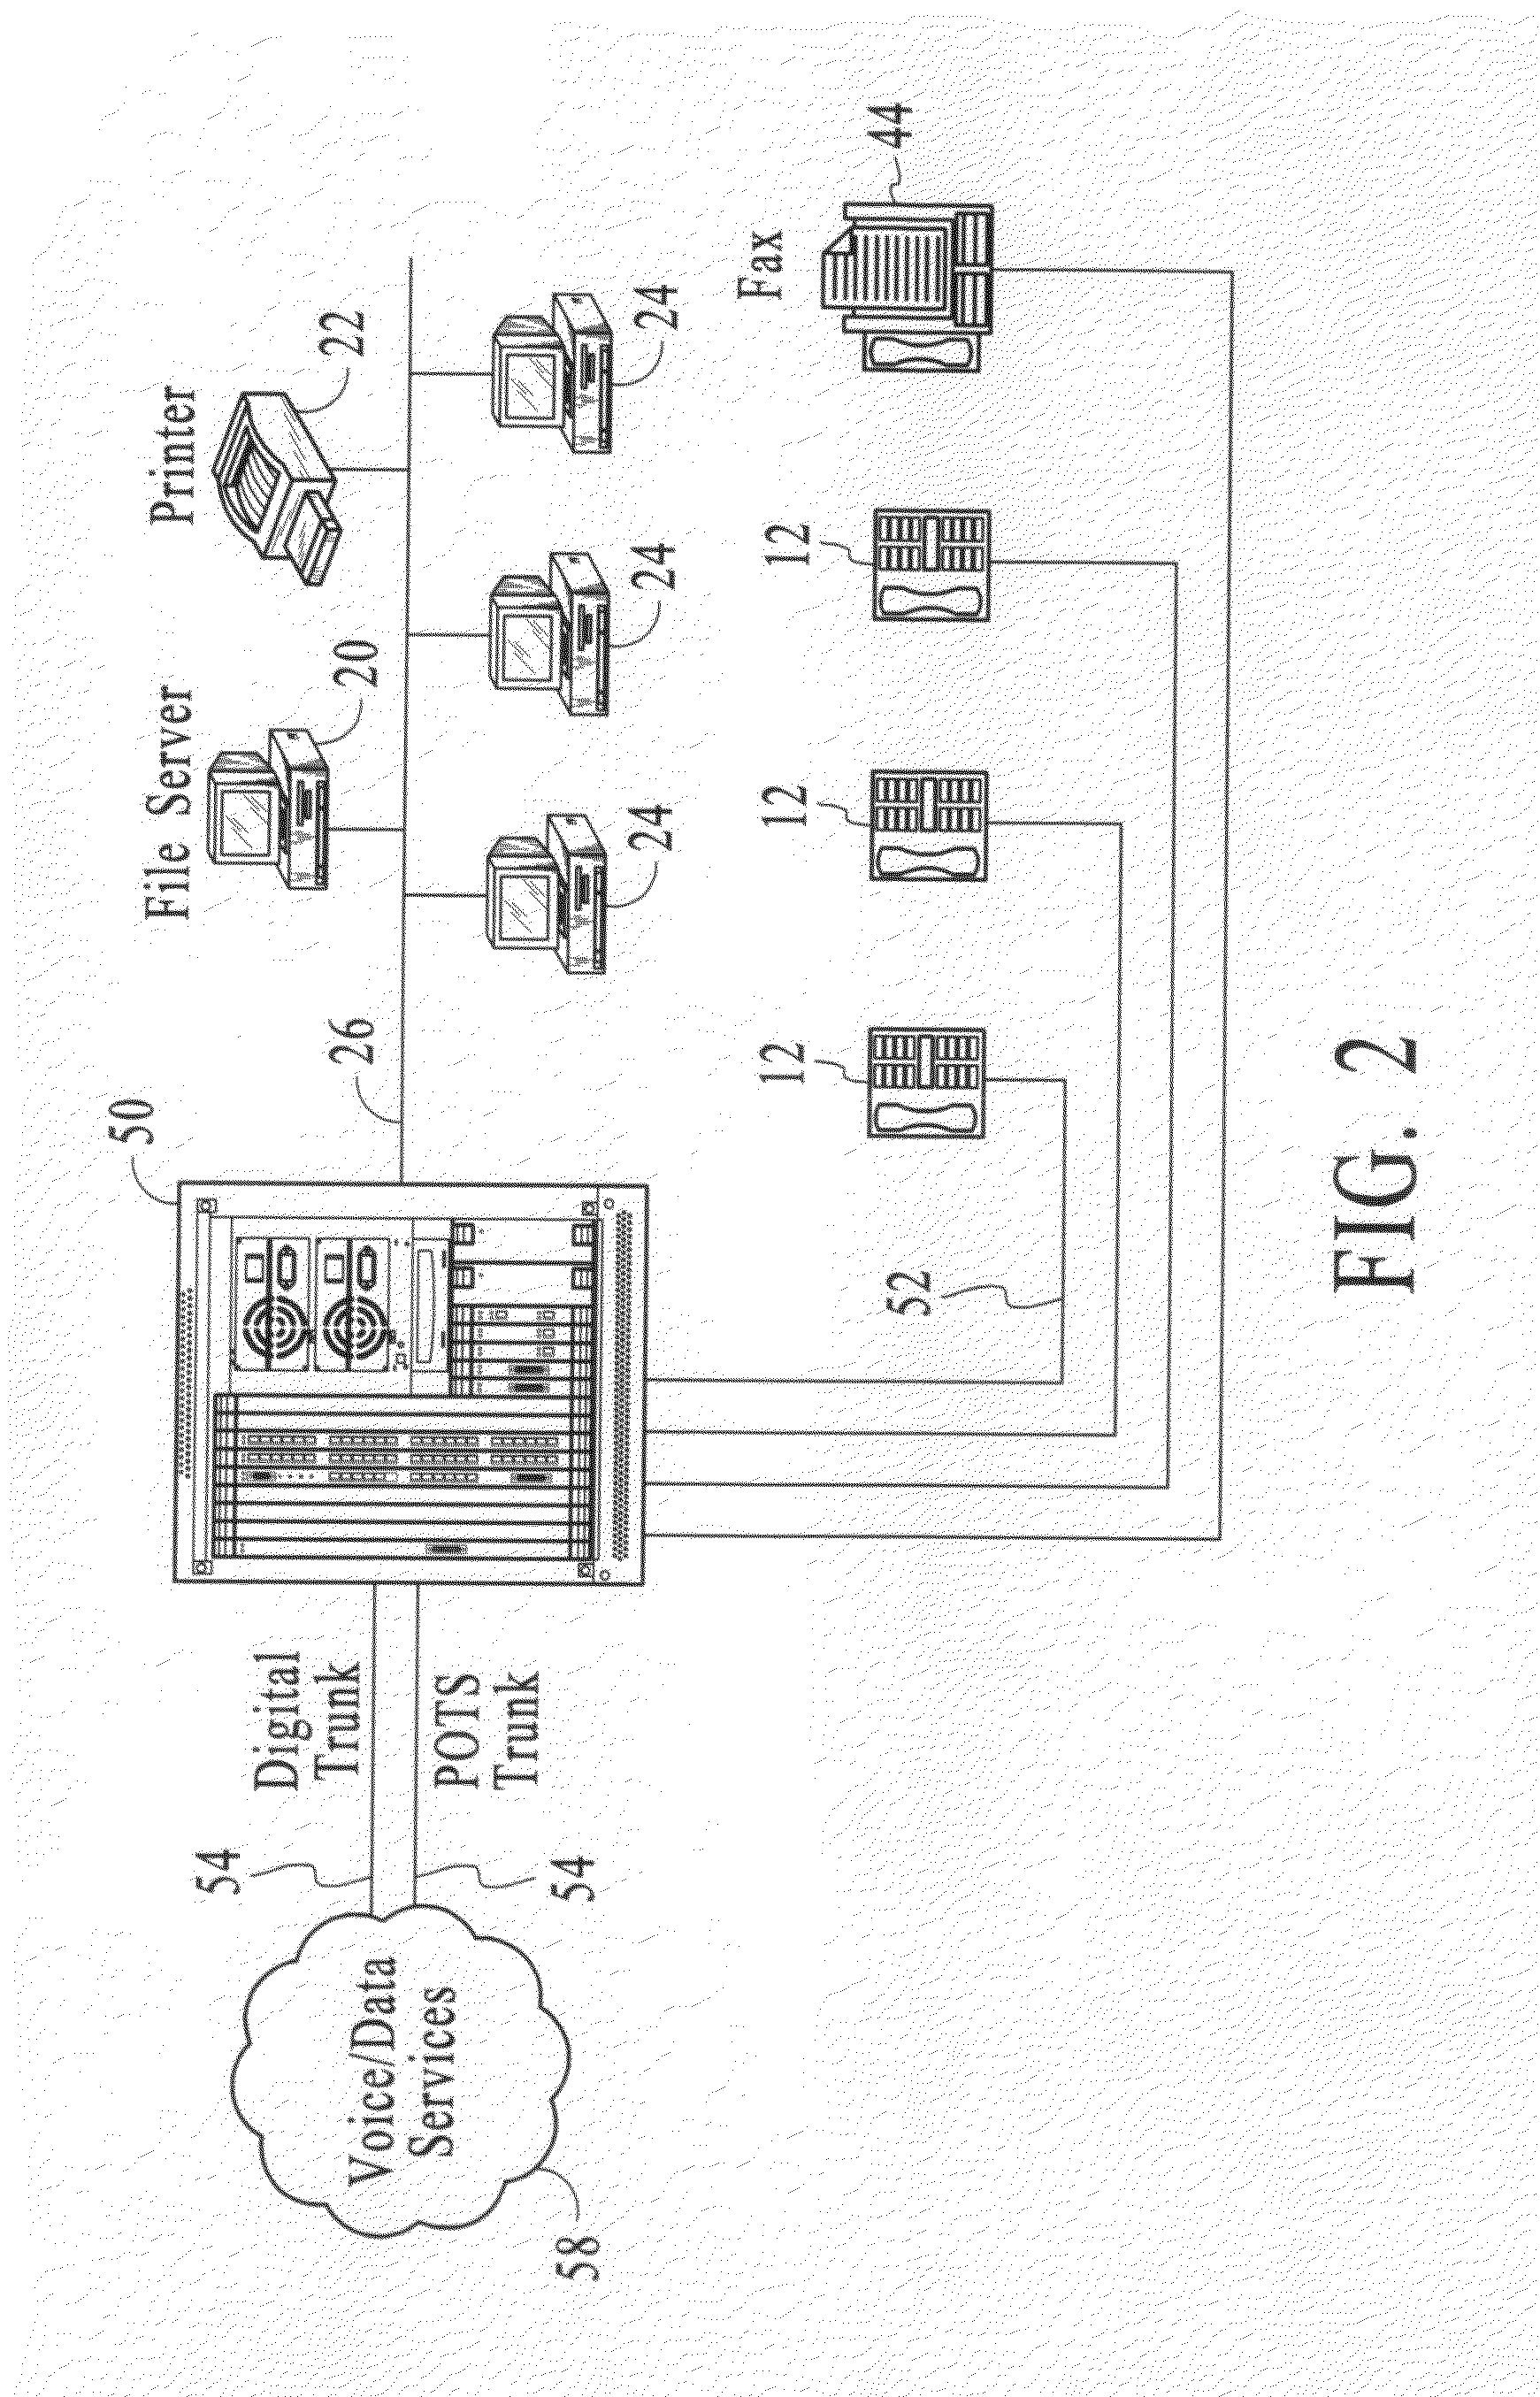 Systems and methods for voice and data communications including a scalable TDM switch/multiplexer